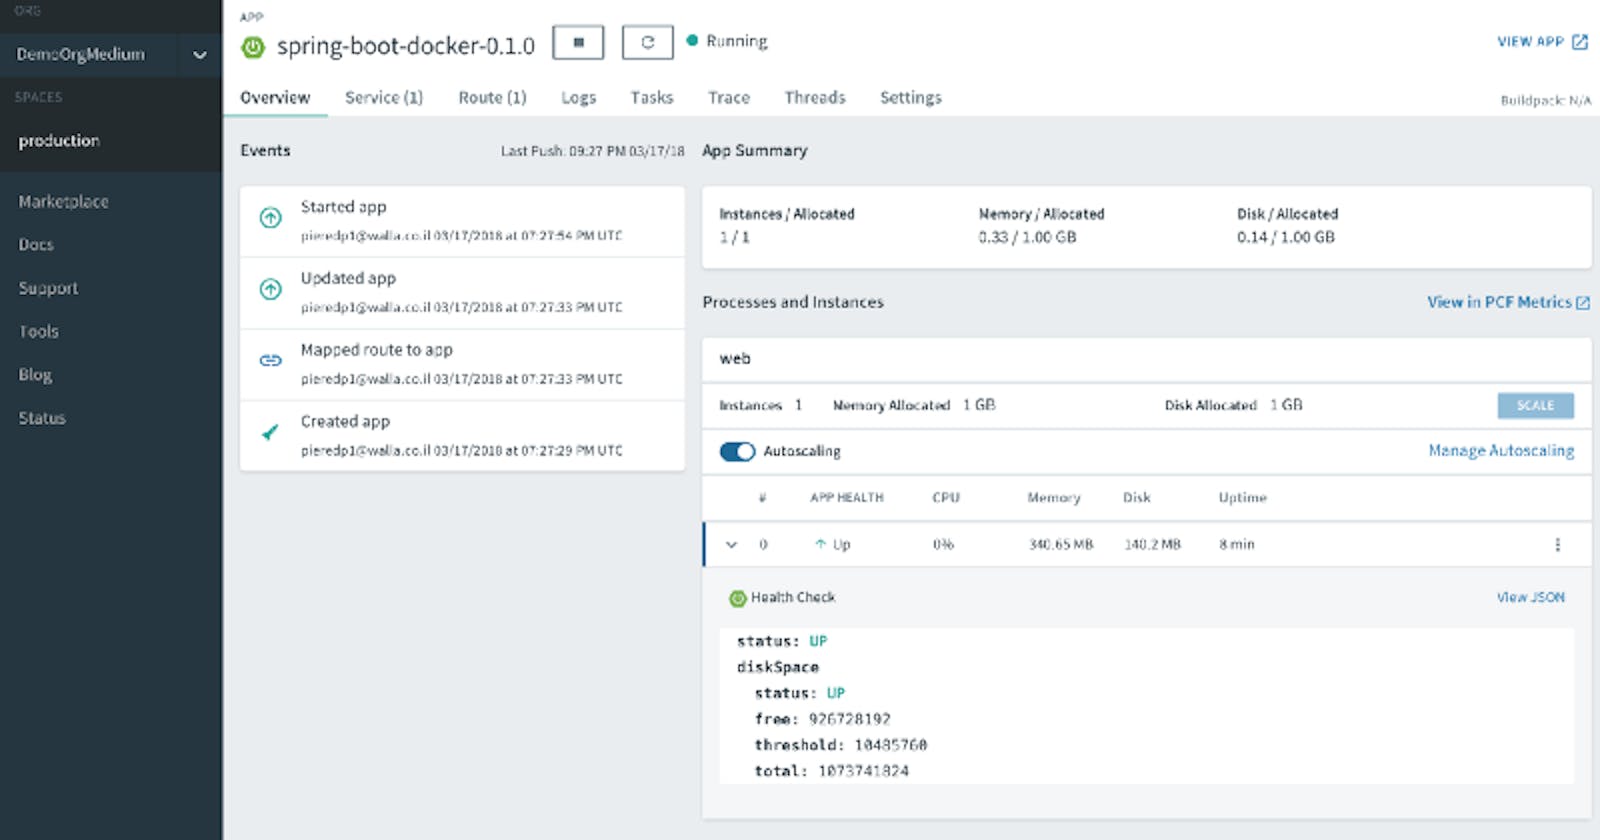 Exploring Pivotal Cloud Foundry’s Apps Manager